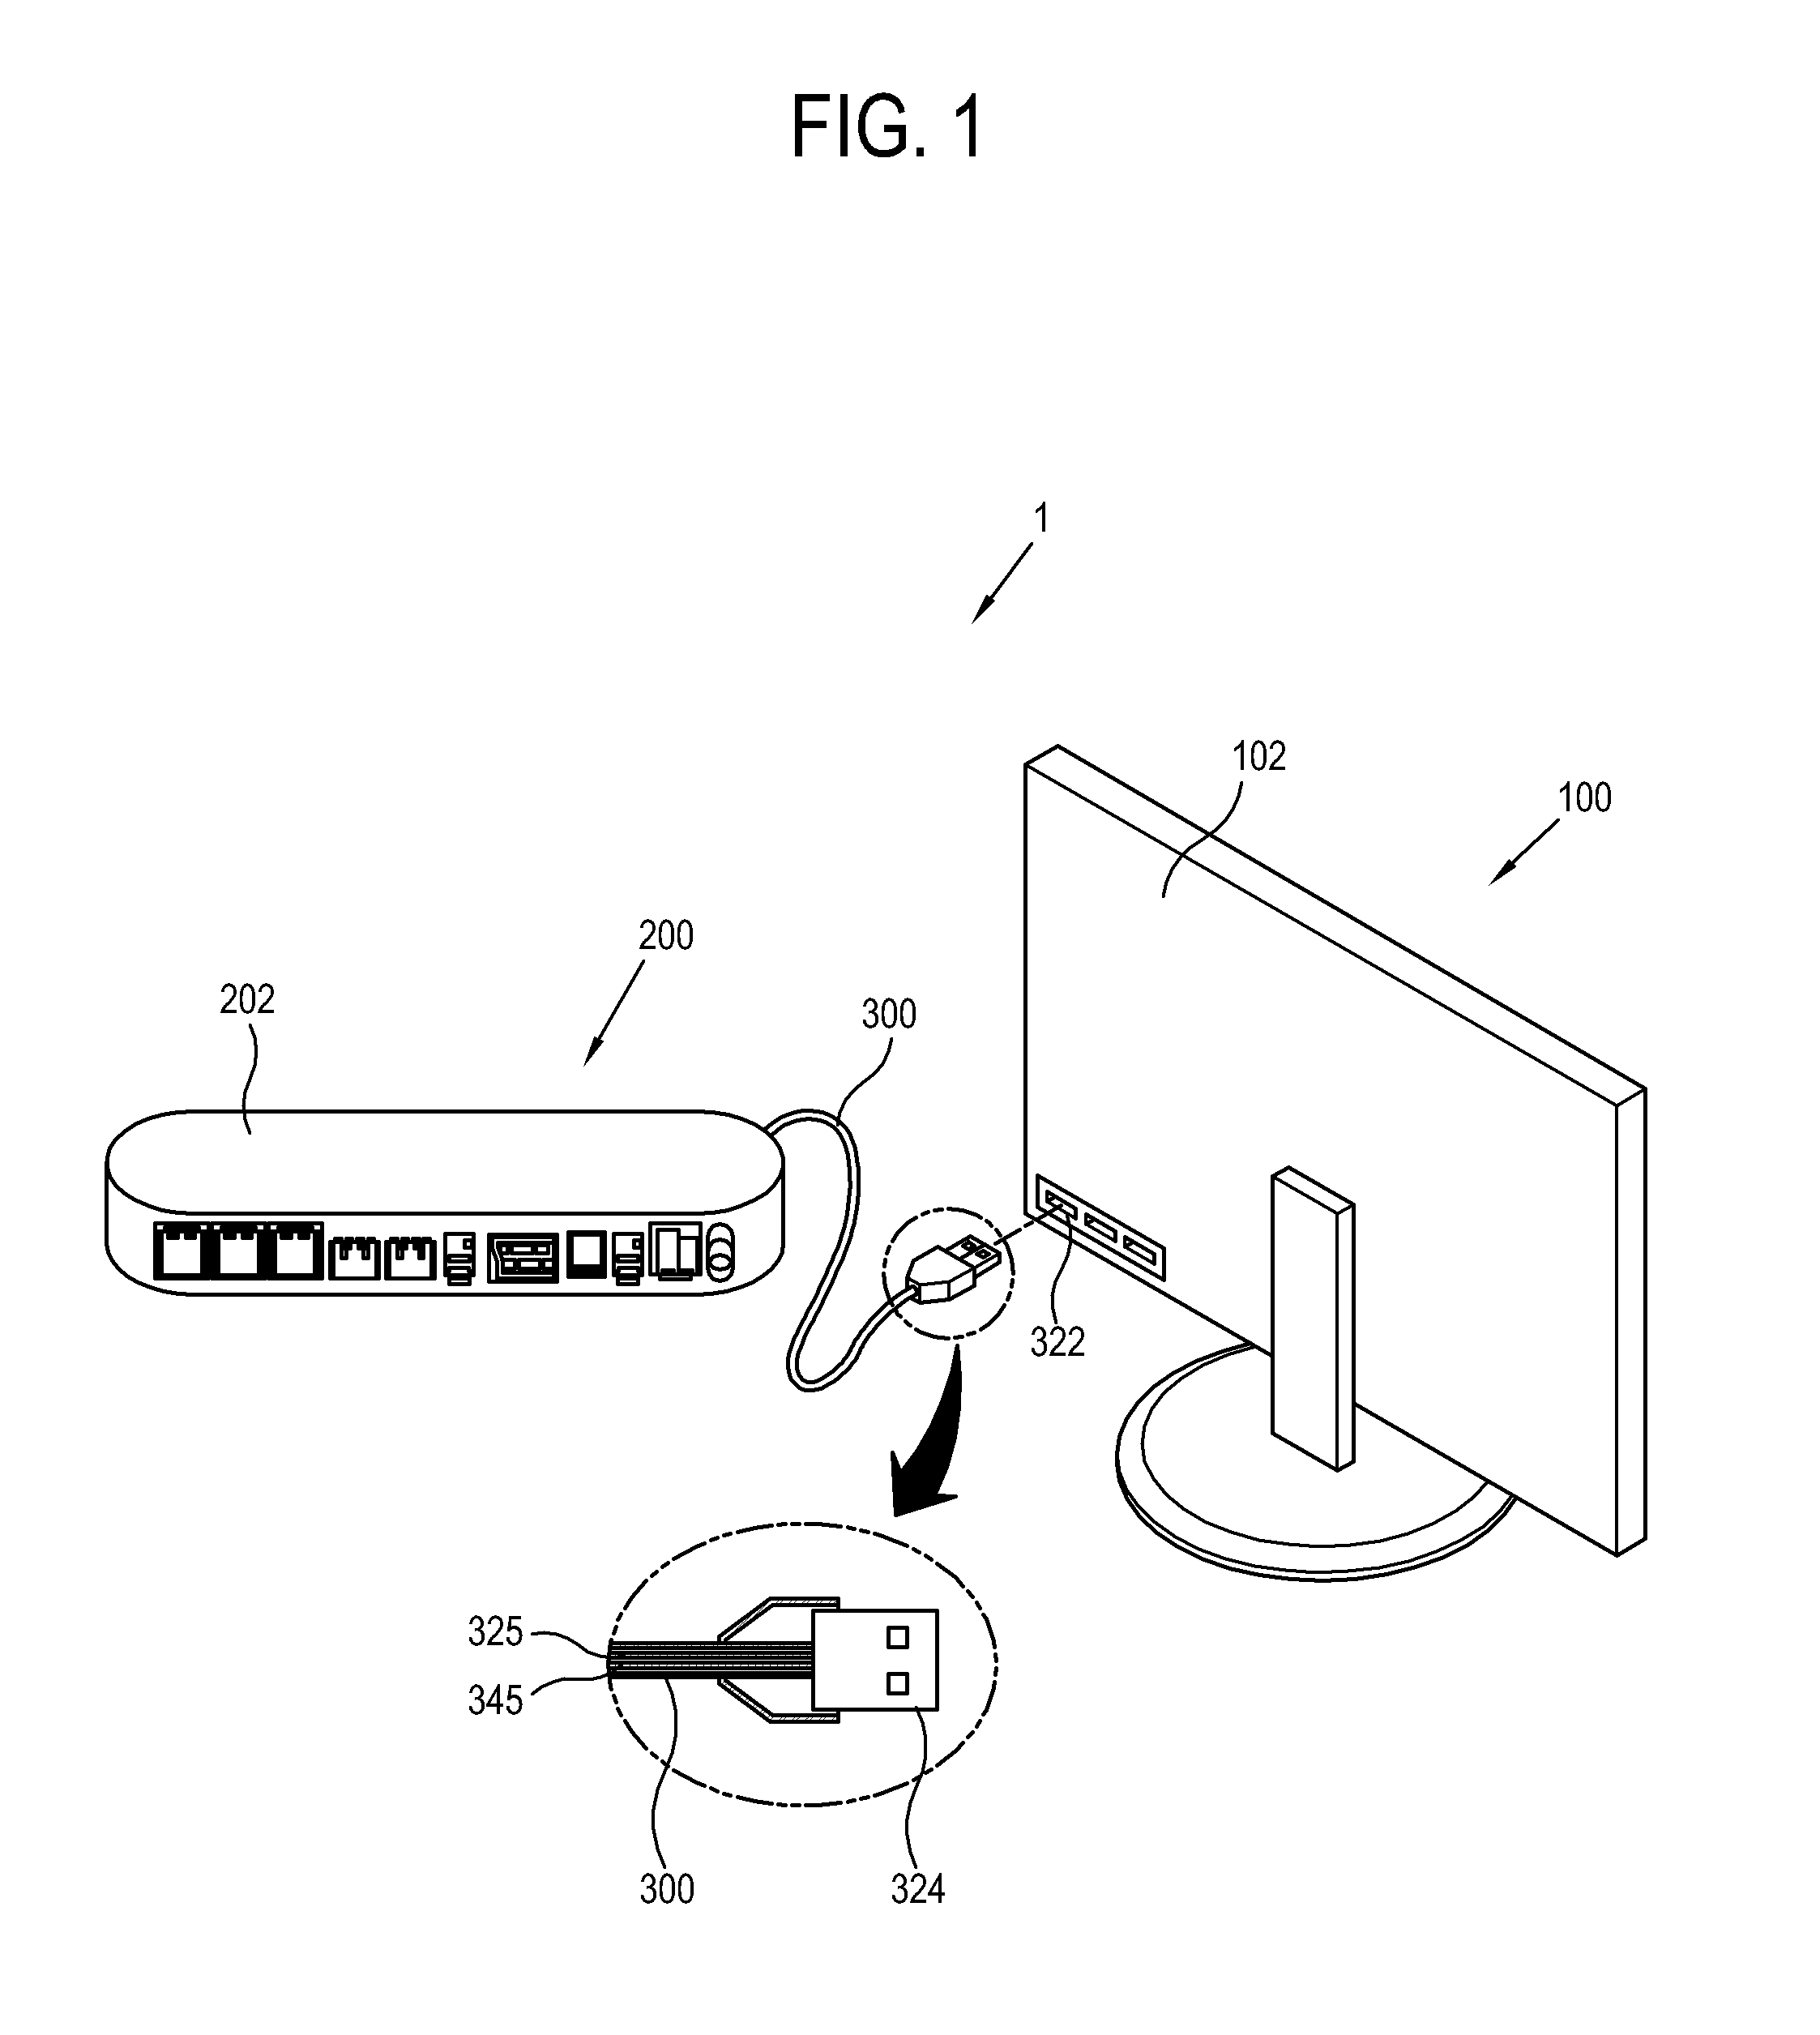 Display apparatus and signal processing module for receiving broadcasting and device and method for receiving broadcasting